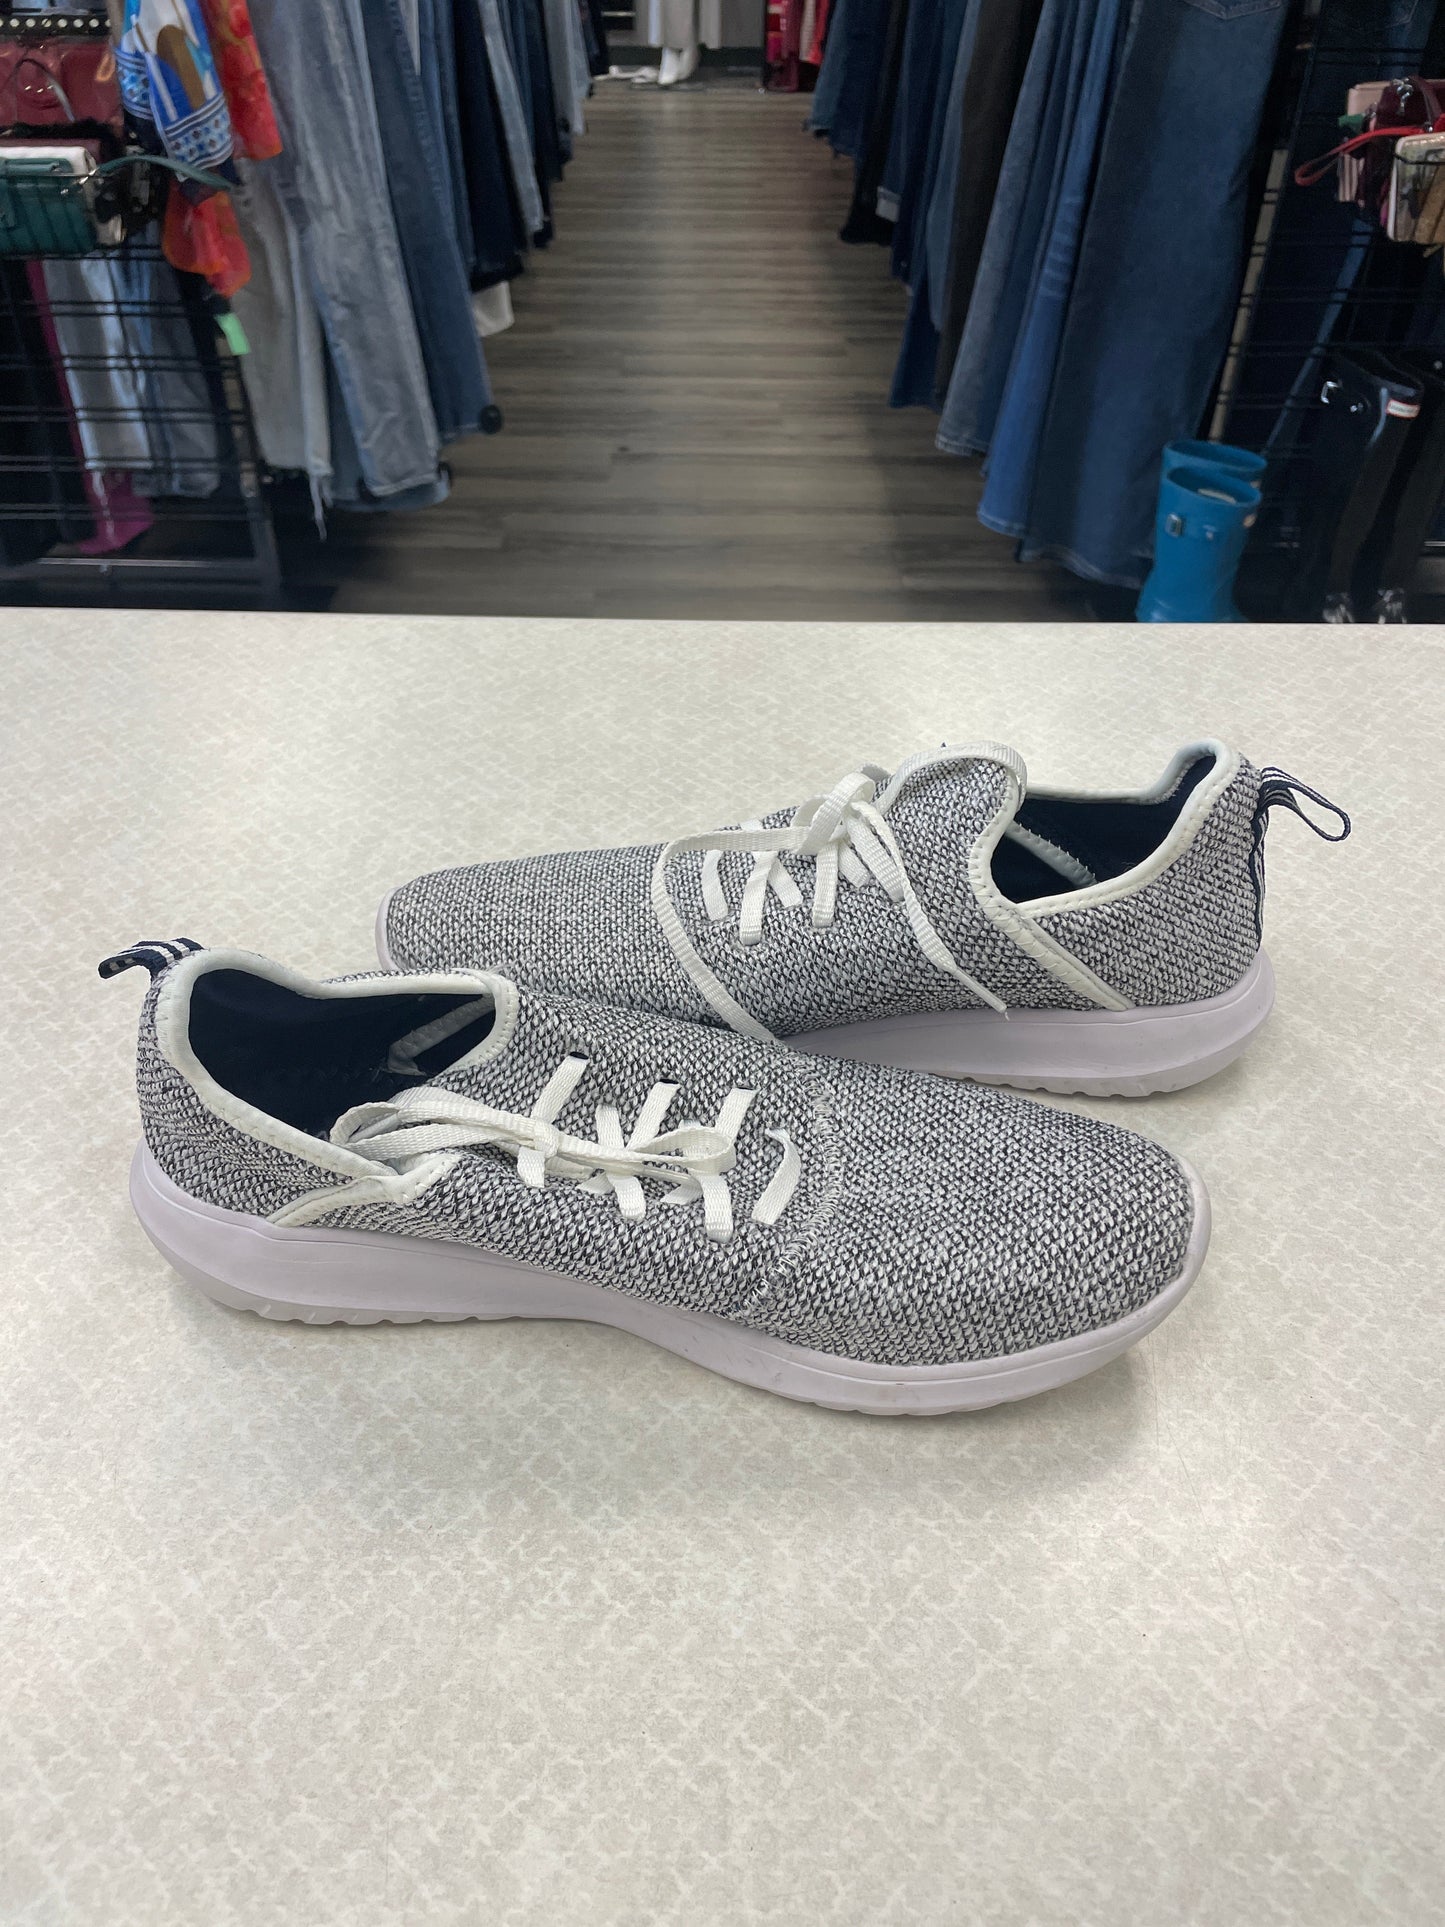 Grey Shoes Sneakers Nautica, Size 8.5